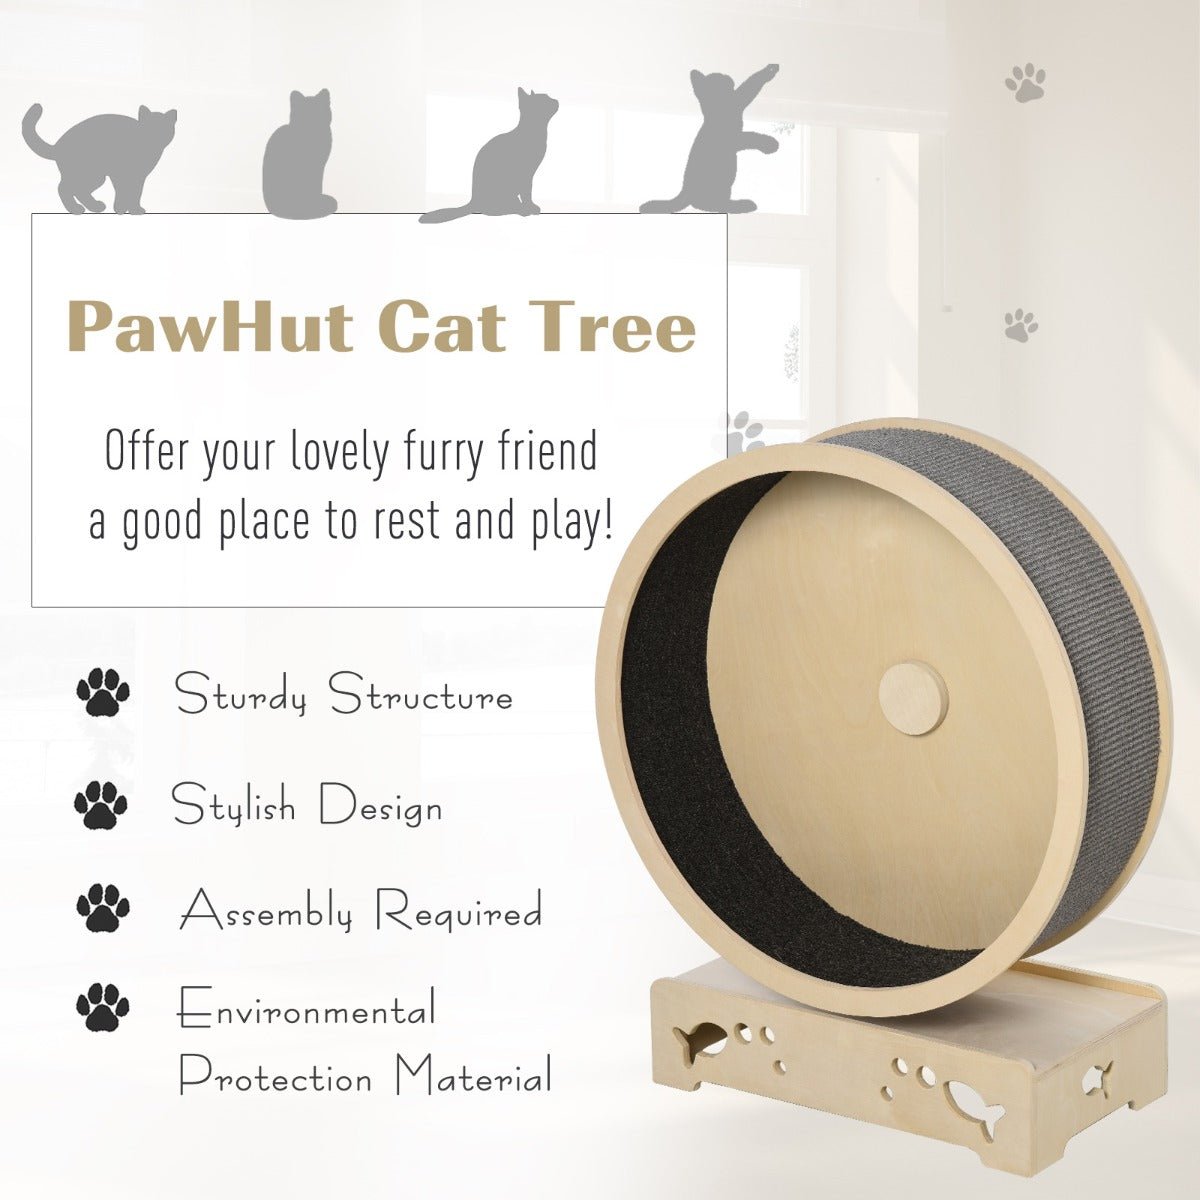 -PawHut Cat Tree with Carpet Runway Wooden Sisal-Covered Cat Tower Condo Playground Furniture for Kittens Pets Activity Tree Natural Gray - Outdoor Style Company